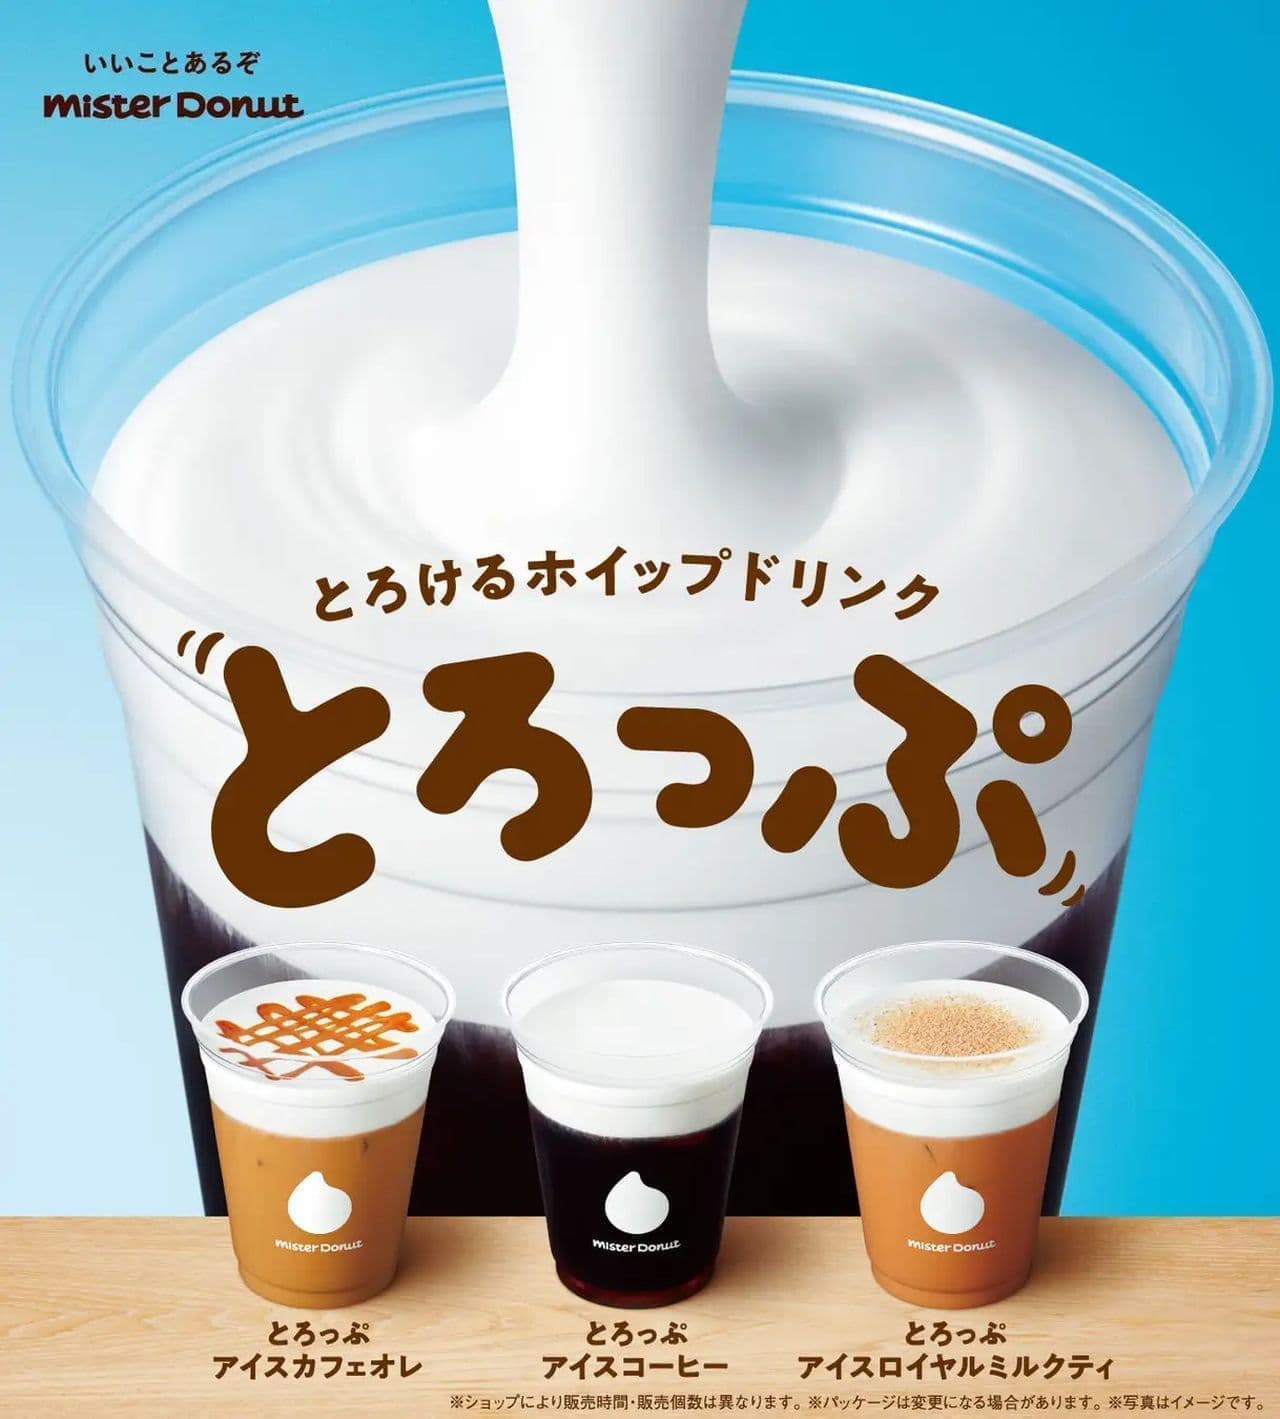 Mr. Donut "Melting Whipped Drink, Melottopu".